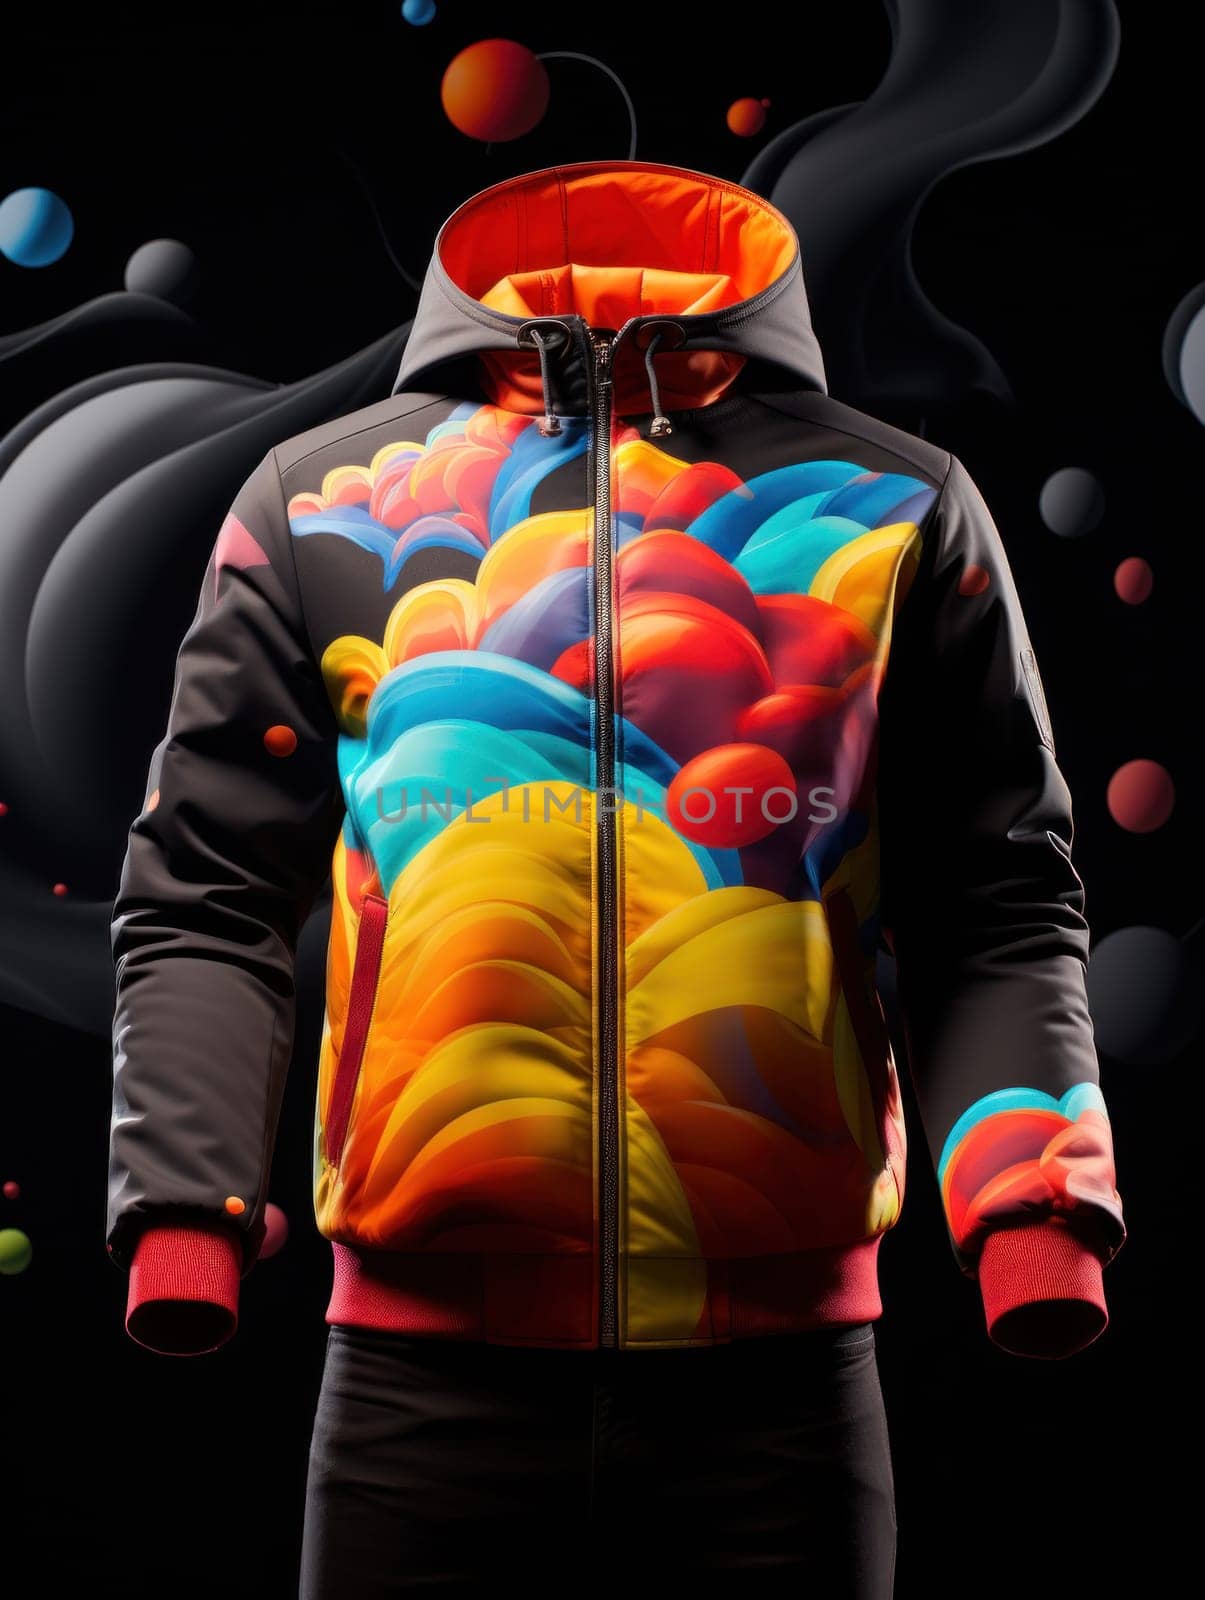 A jacket with a colorful design on it and black background